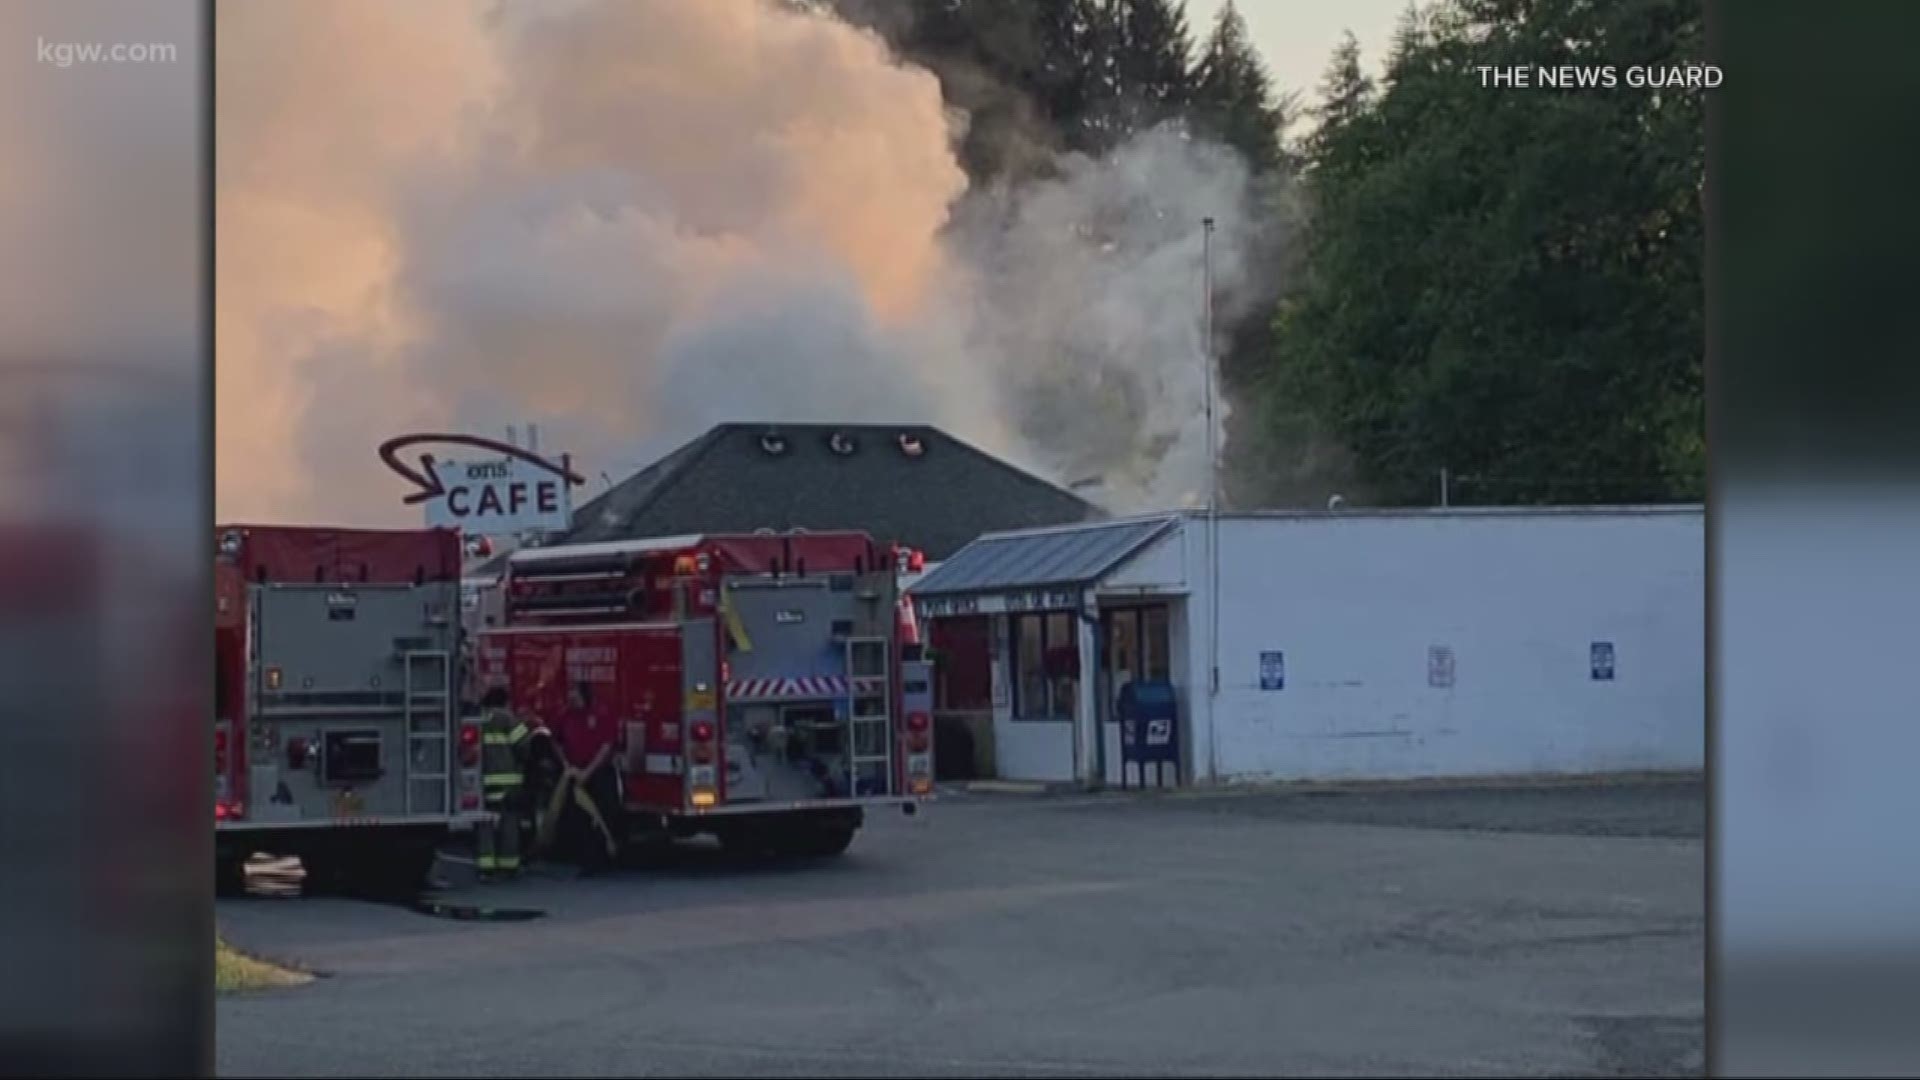 A large fire damaged an iconic restaurant and Oregon landmark. Firefighters say Otis Café will likely have to be closed for awhile.